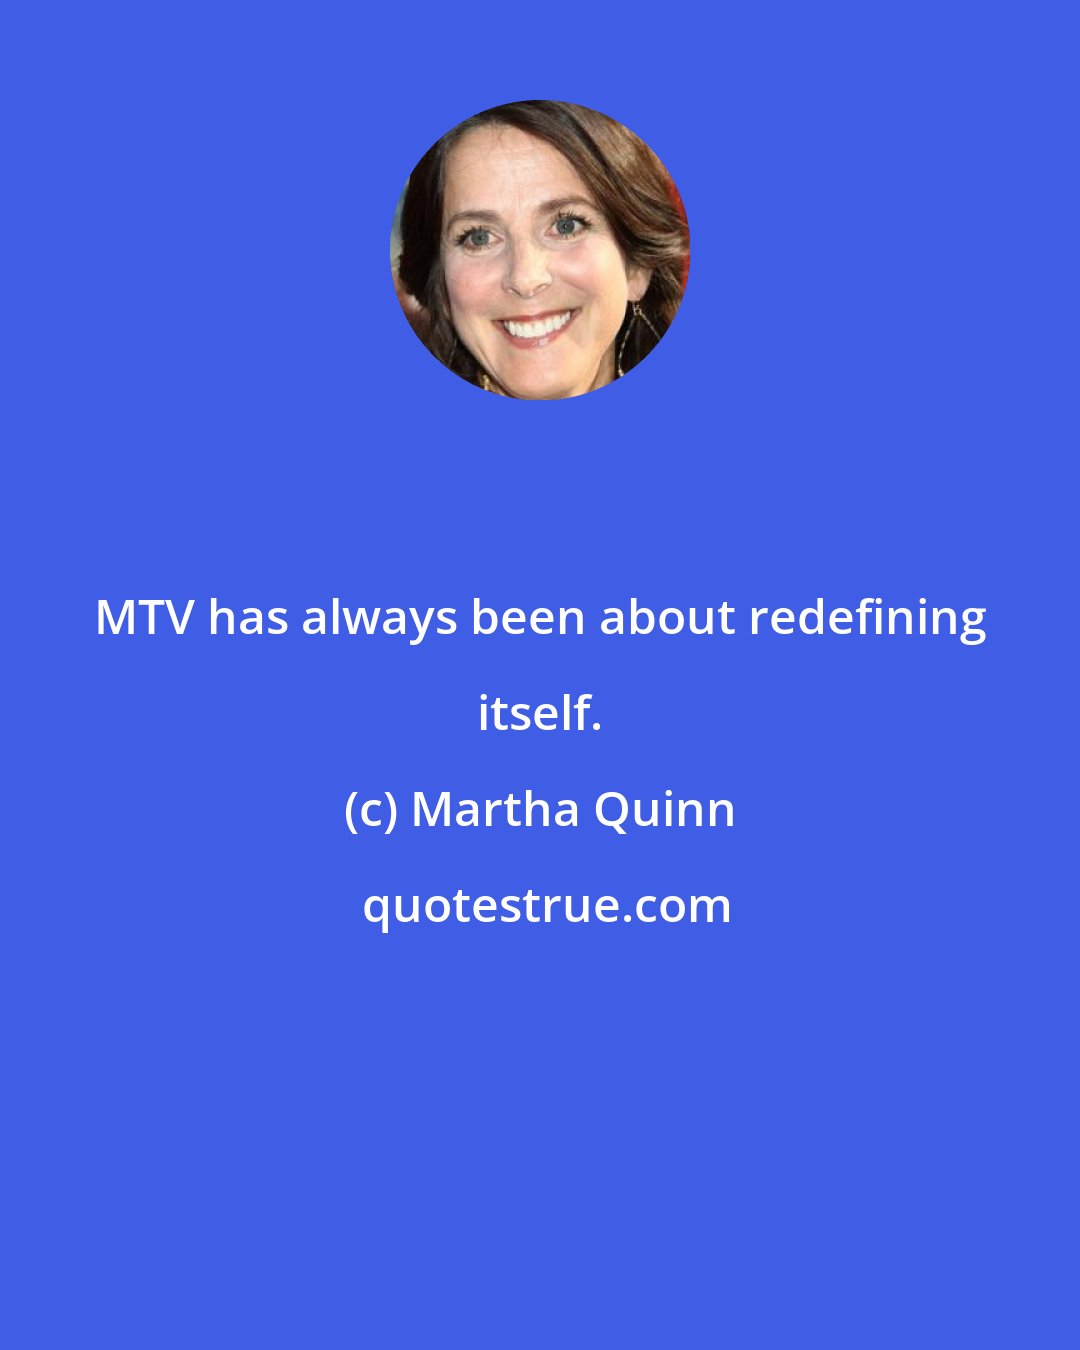 Martha Quinn: MTV has always been about redefining itself.